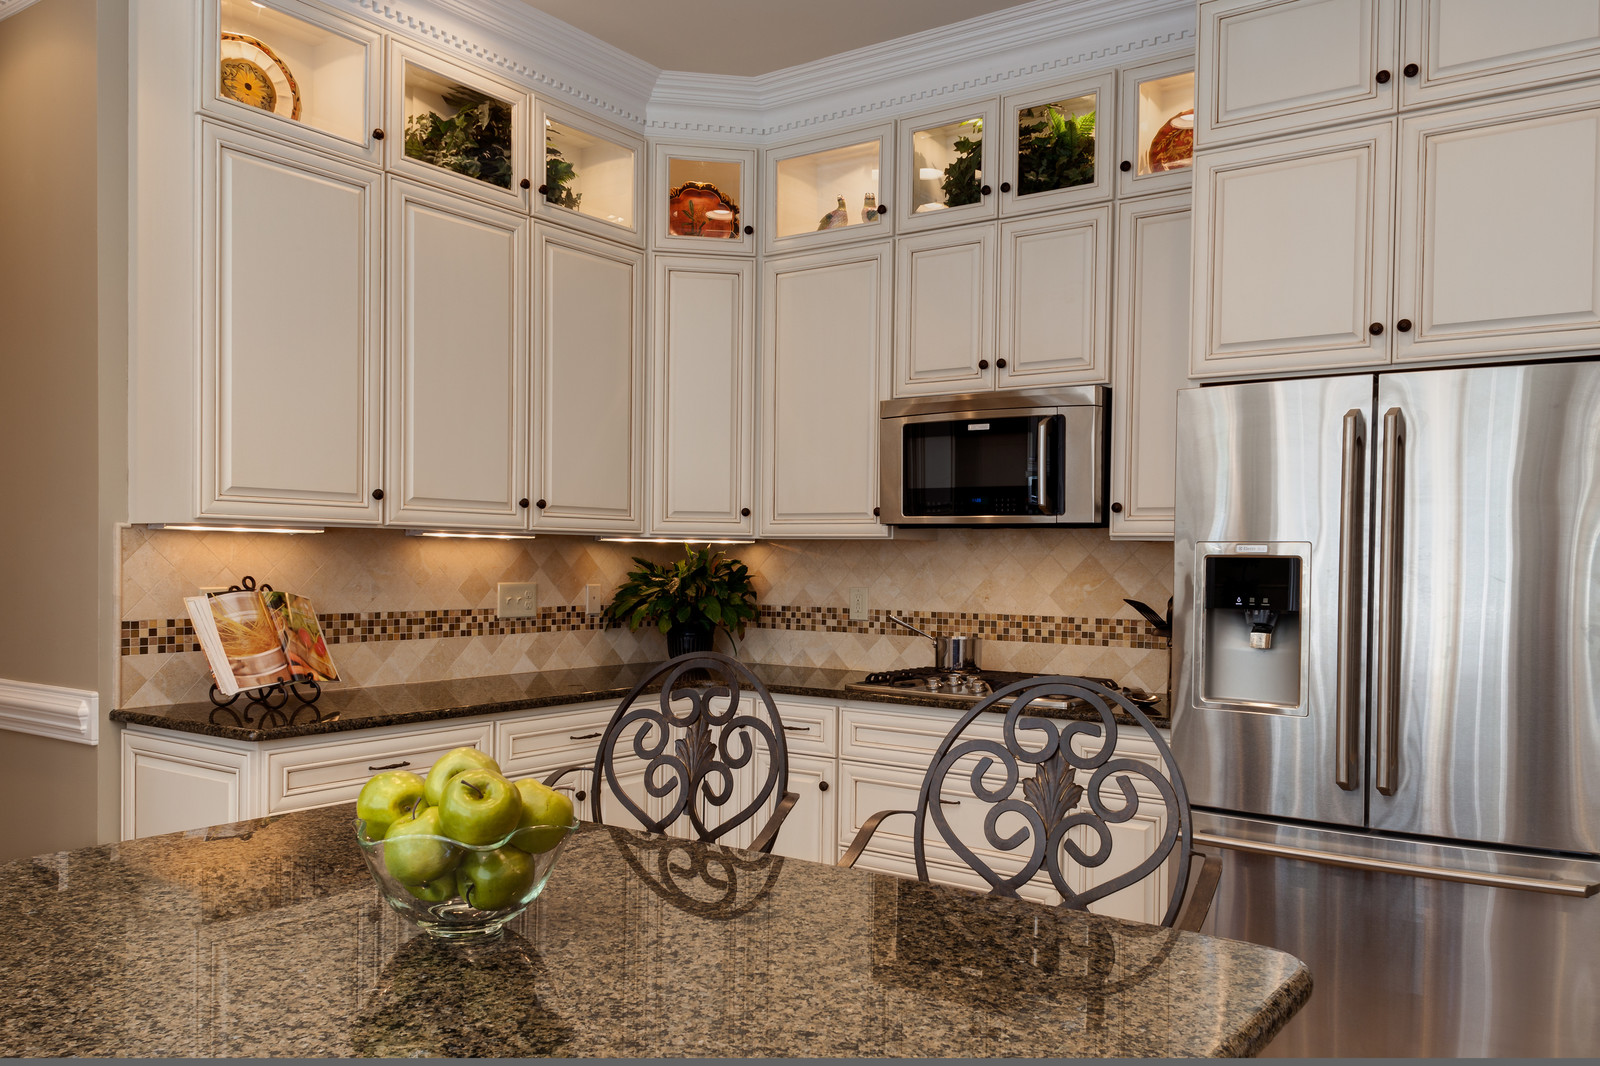 White Cabinets With Brown Granite, Pictures Of Kitchens With White Cabinets And Brown Countertops